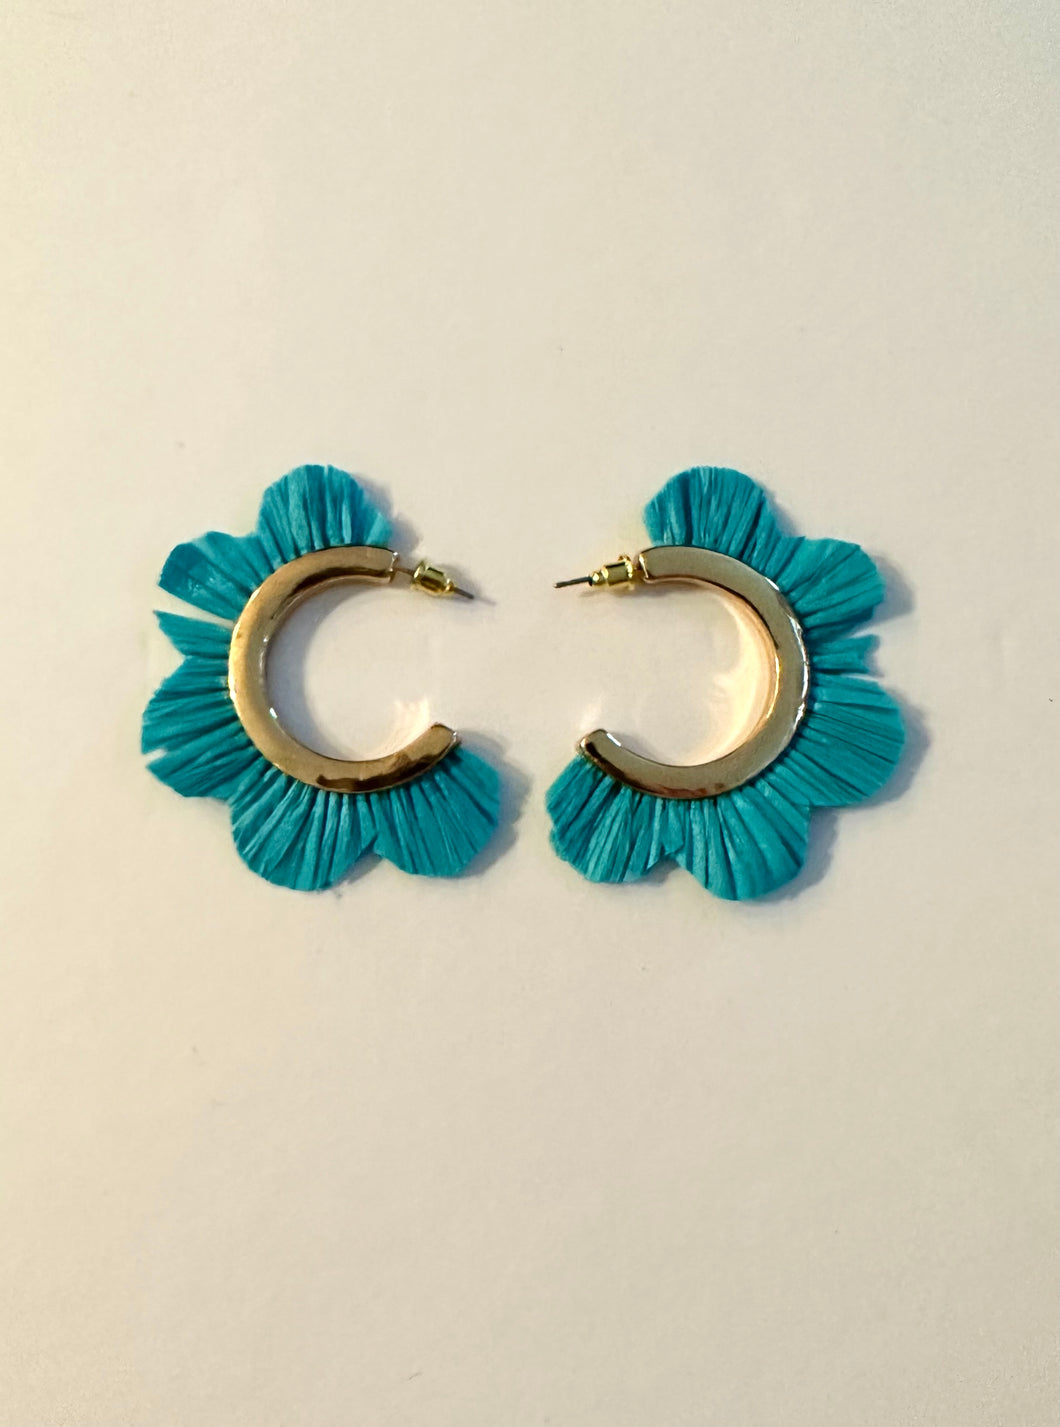 Turquoise Raffia Flower Hoops. Light weight. About 1.5